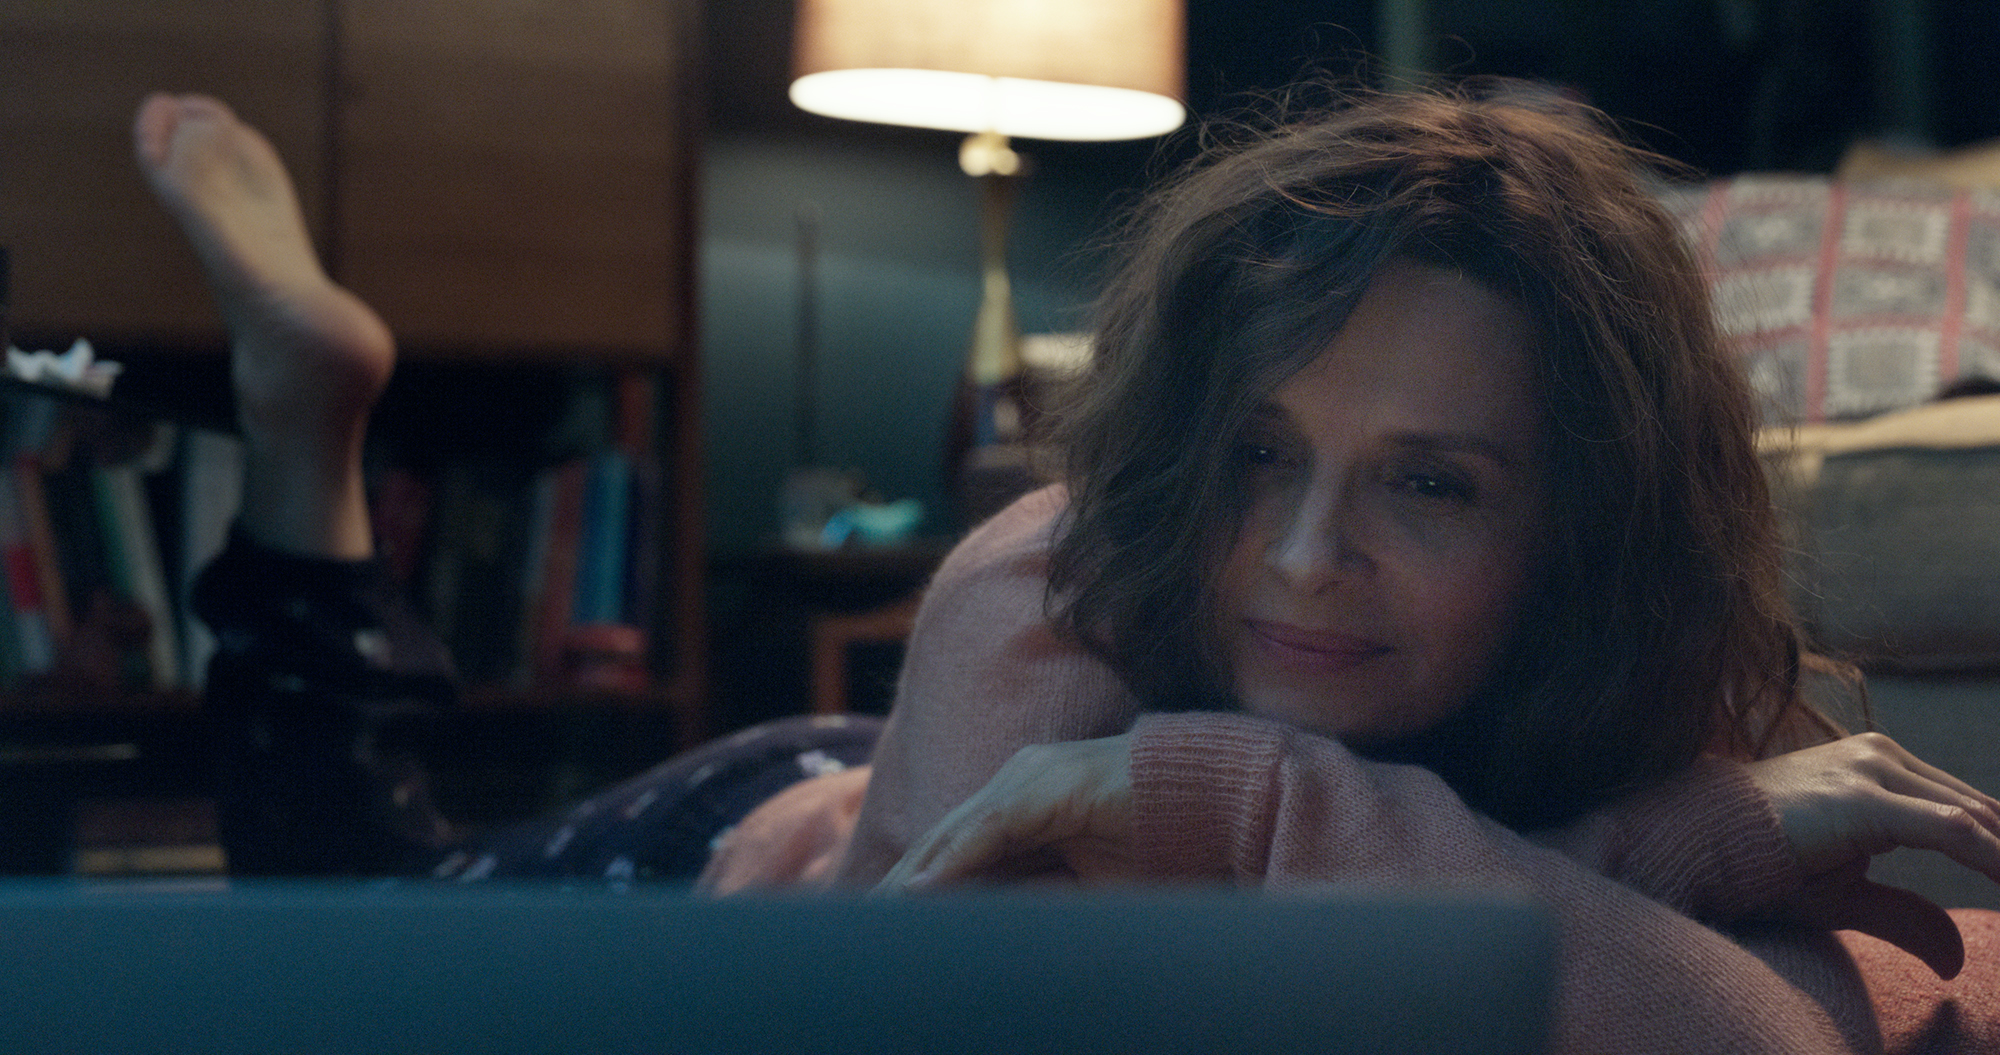 Juliette Binoche on the computer in 'Who You Think I Am'